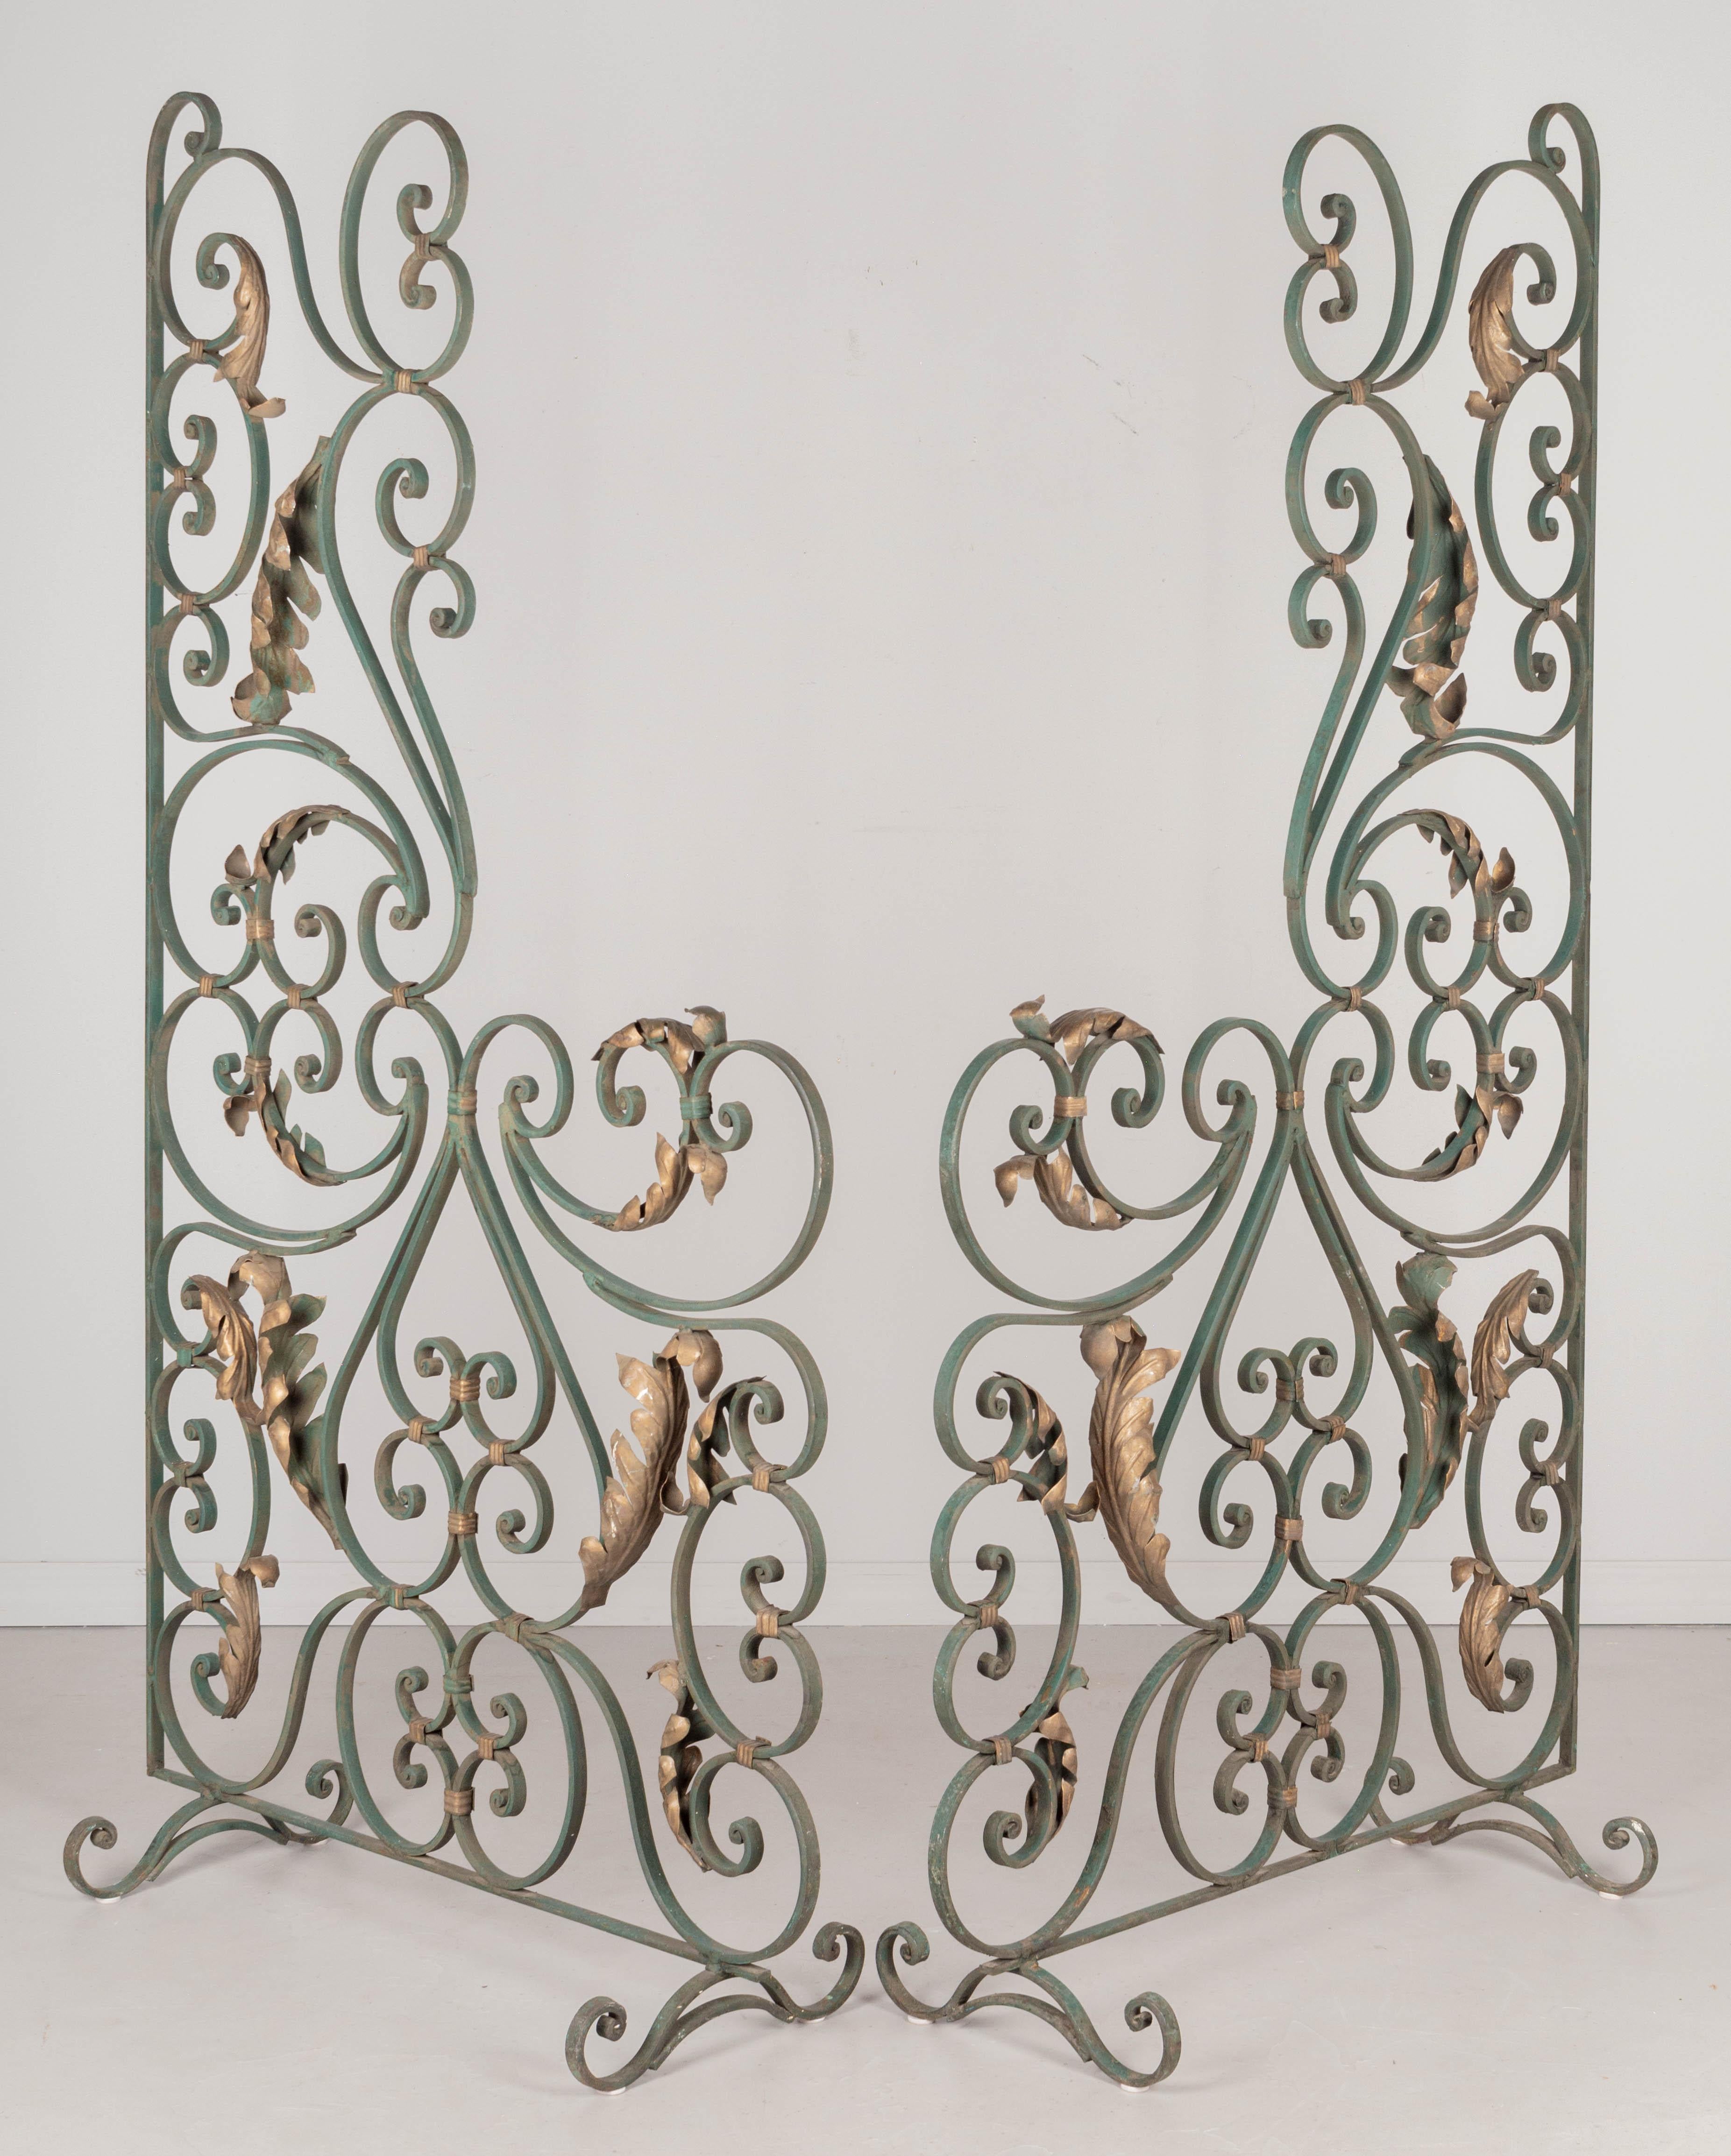 Pair of French Wrought Iron Screens or Room Dividers In Good Condition For Sale In Winter Park, FL